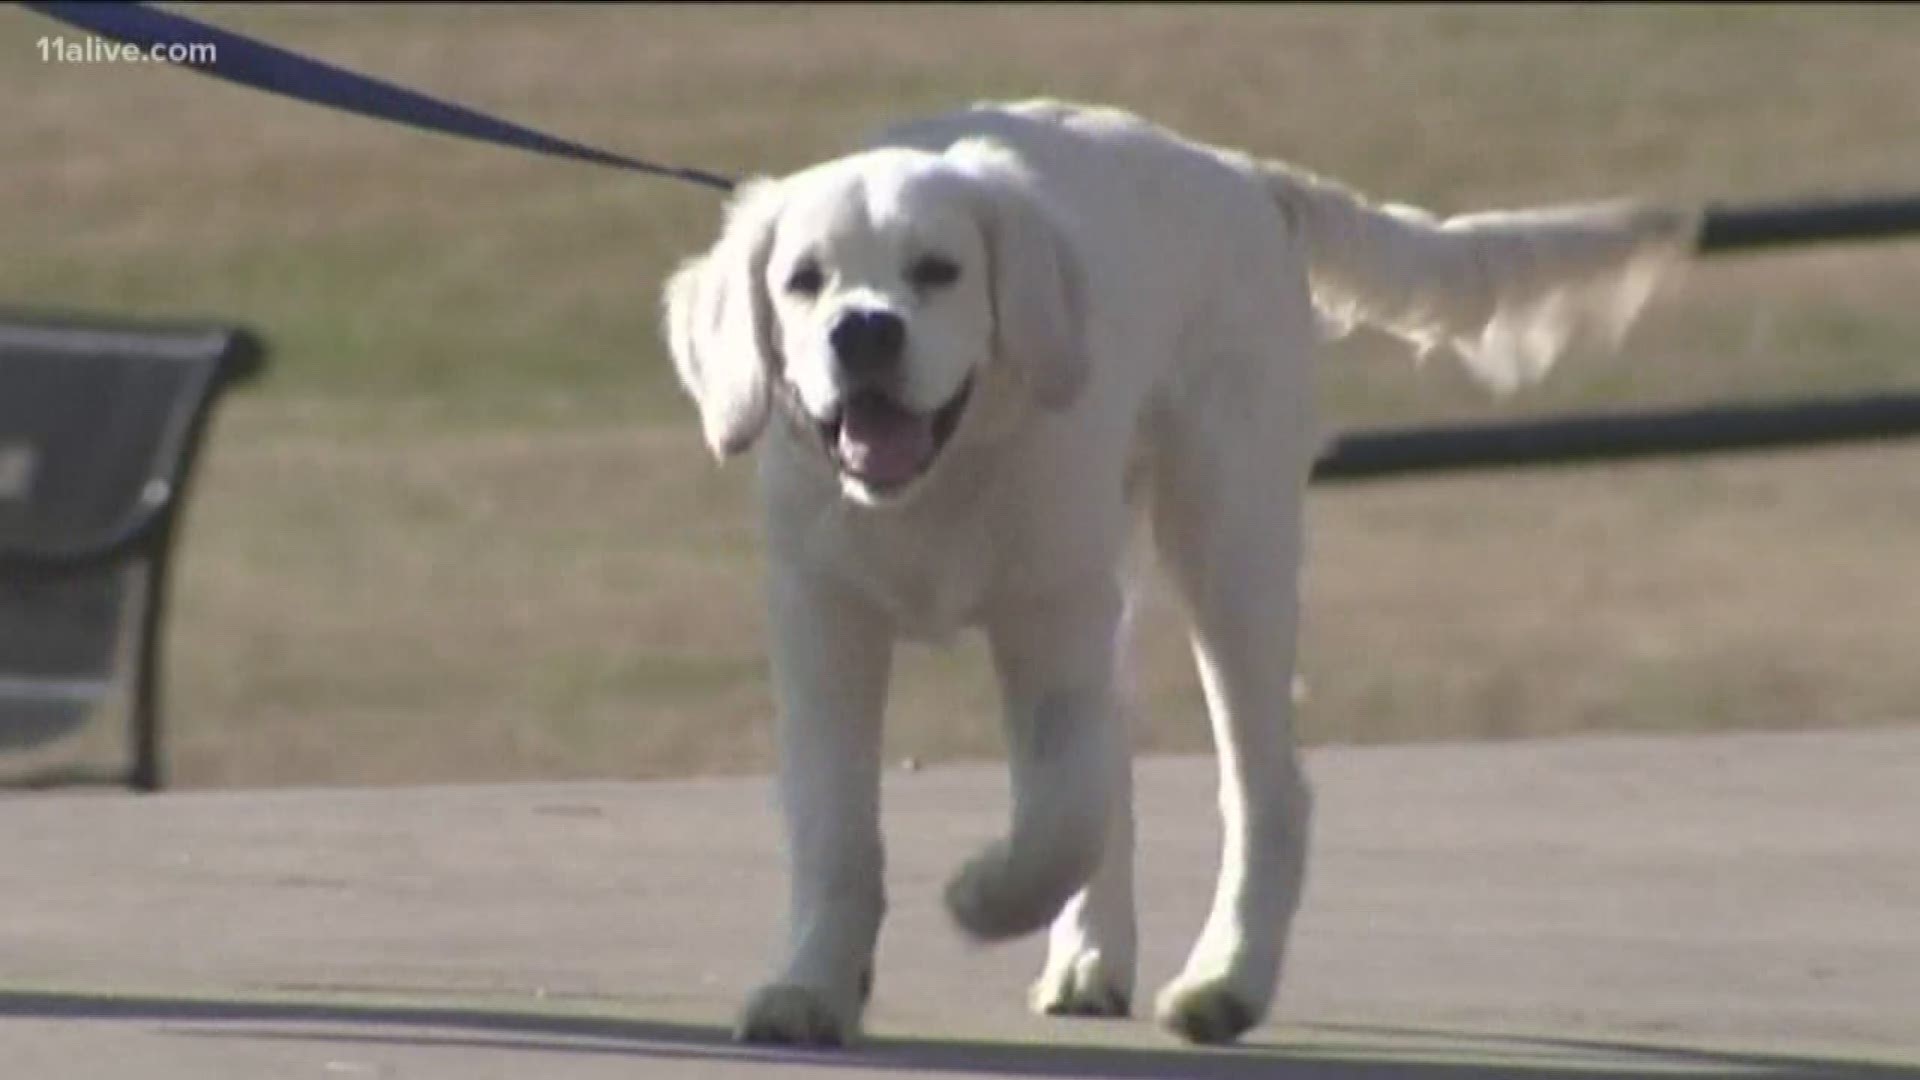 Experts say dogs help students feel a sense of home.